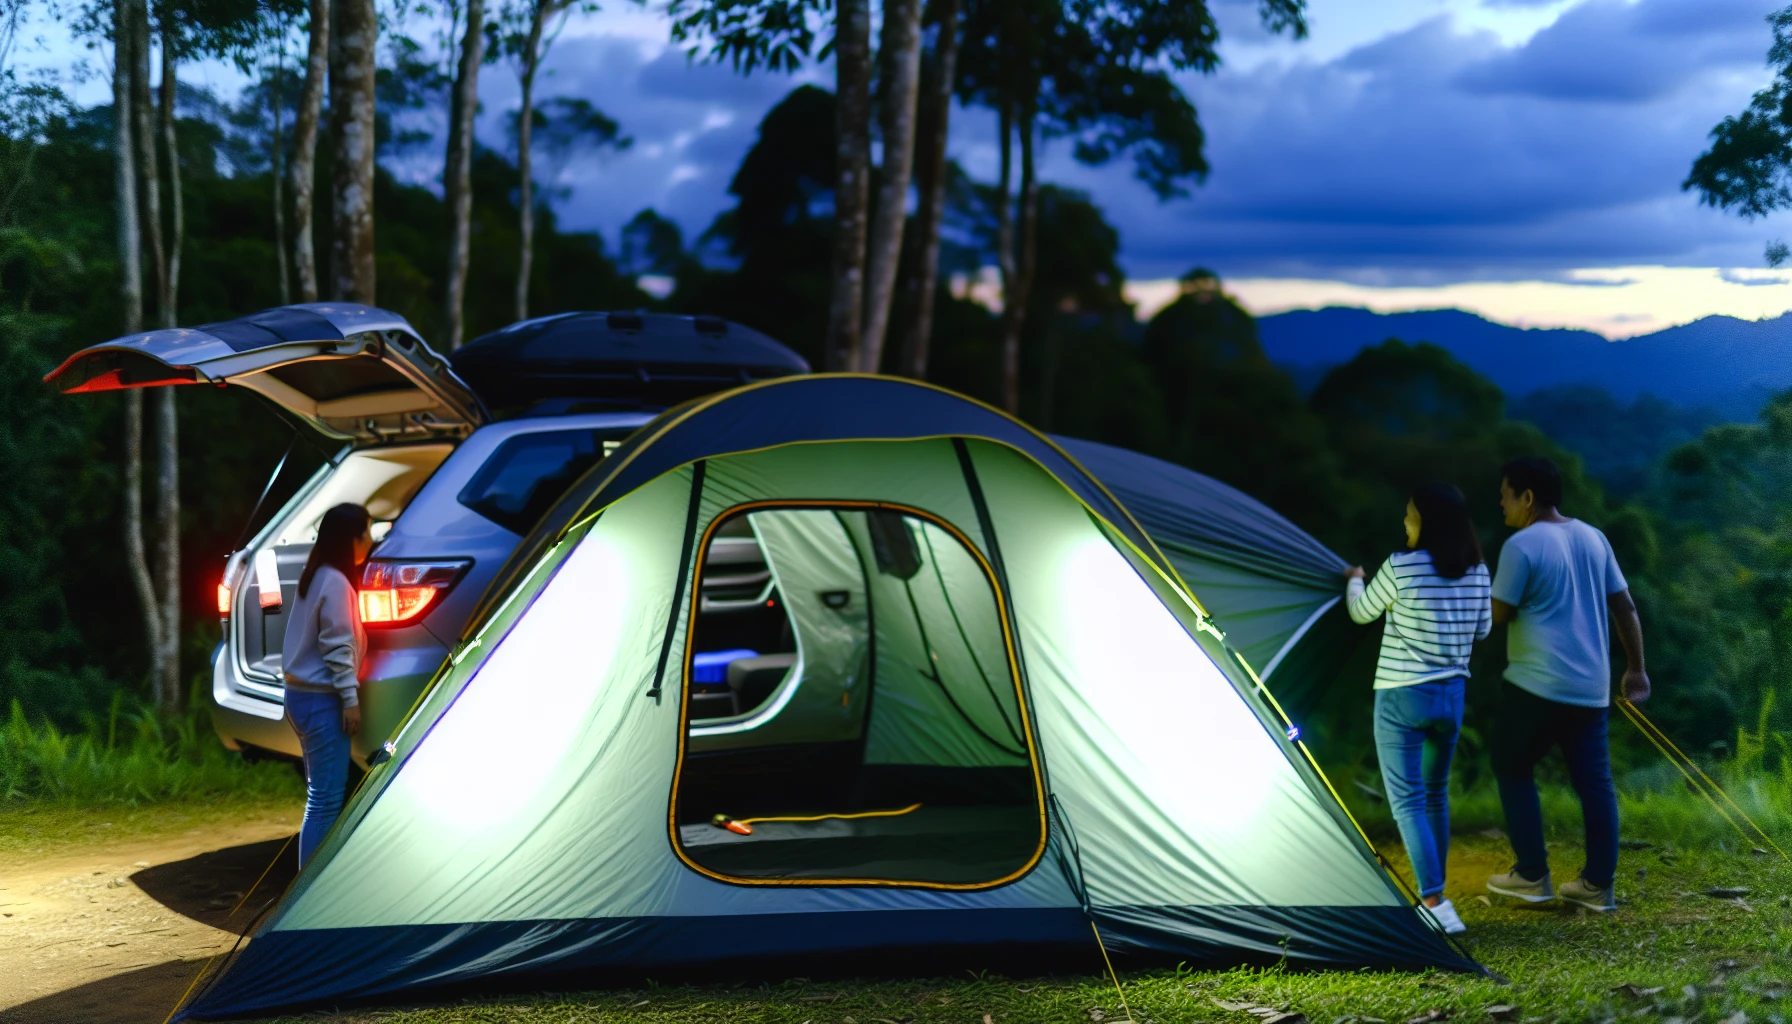 Convenient Rightline Gear SUV Tent with glow-in-the-dark zippers